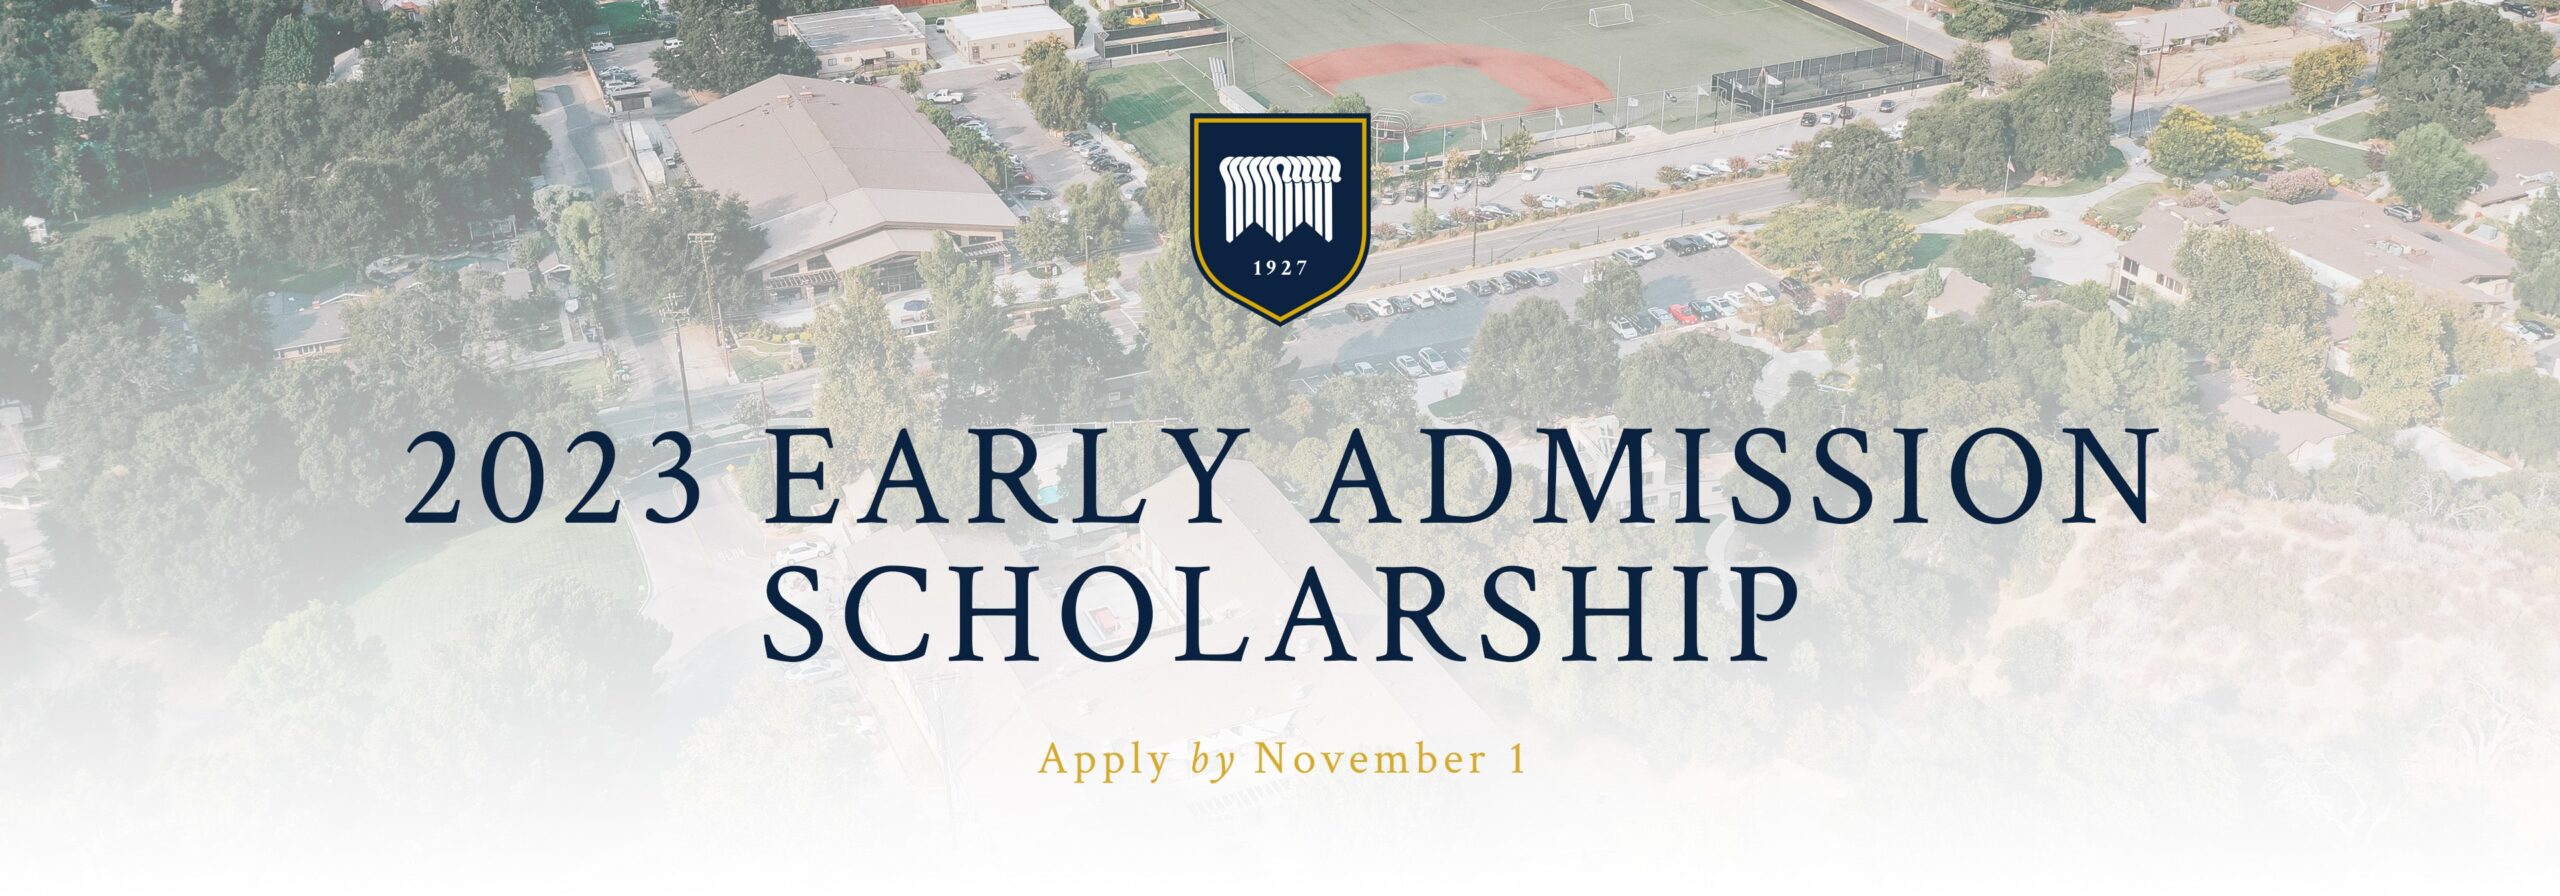 The Master's University Early Admission Scholarship 2023